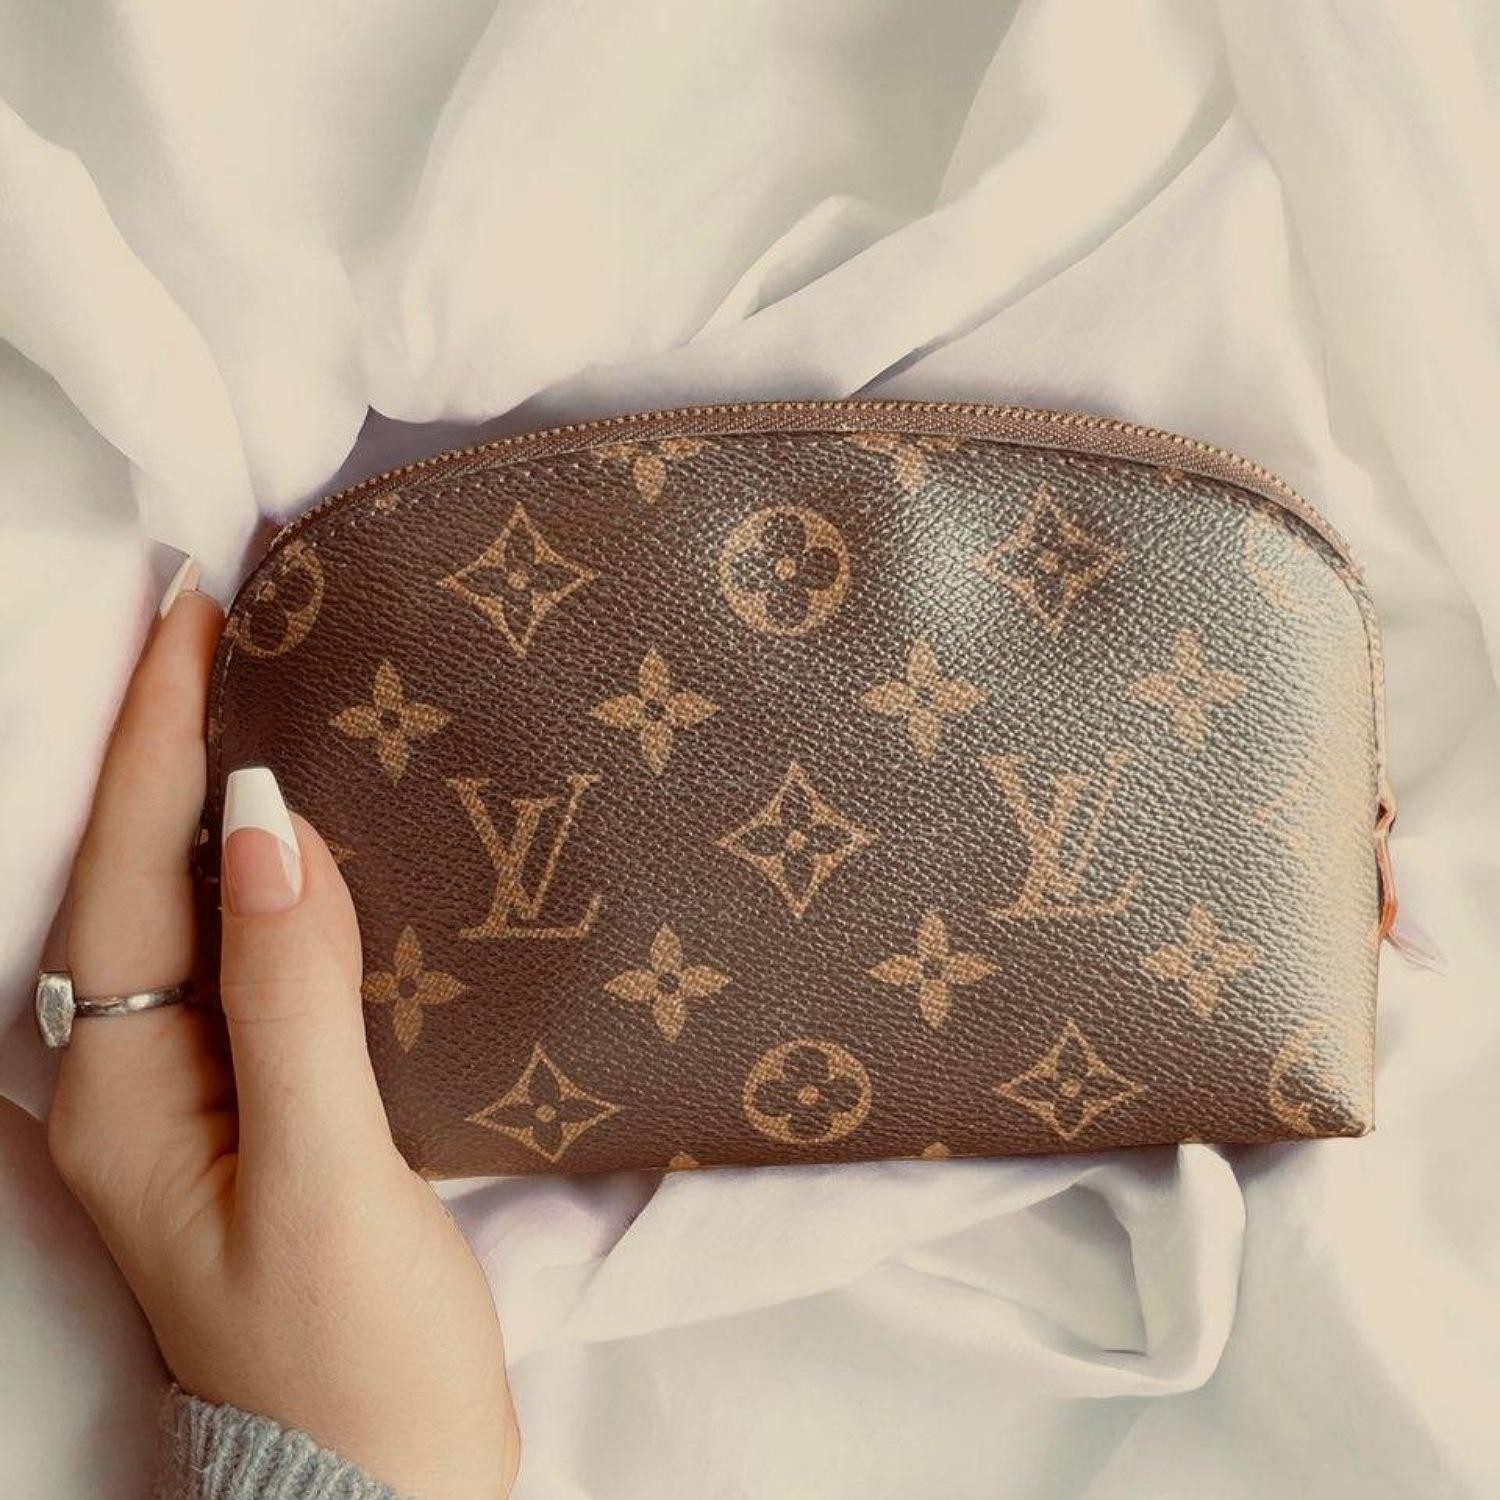 This compact cosmetic pouch in Monogram canvas slips easily into a handbag or suitcase. Its round shape and flat base facilitates access to small products.

Designer: Louis Vuitton
Material: Monogram coated canvas
Date/Authenticity Code: CA0172
Year